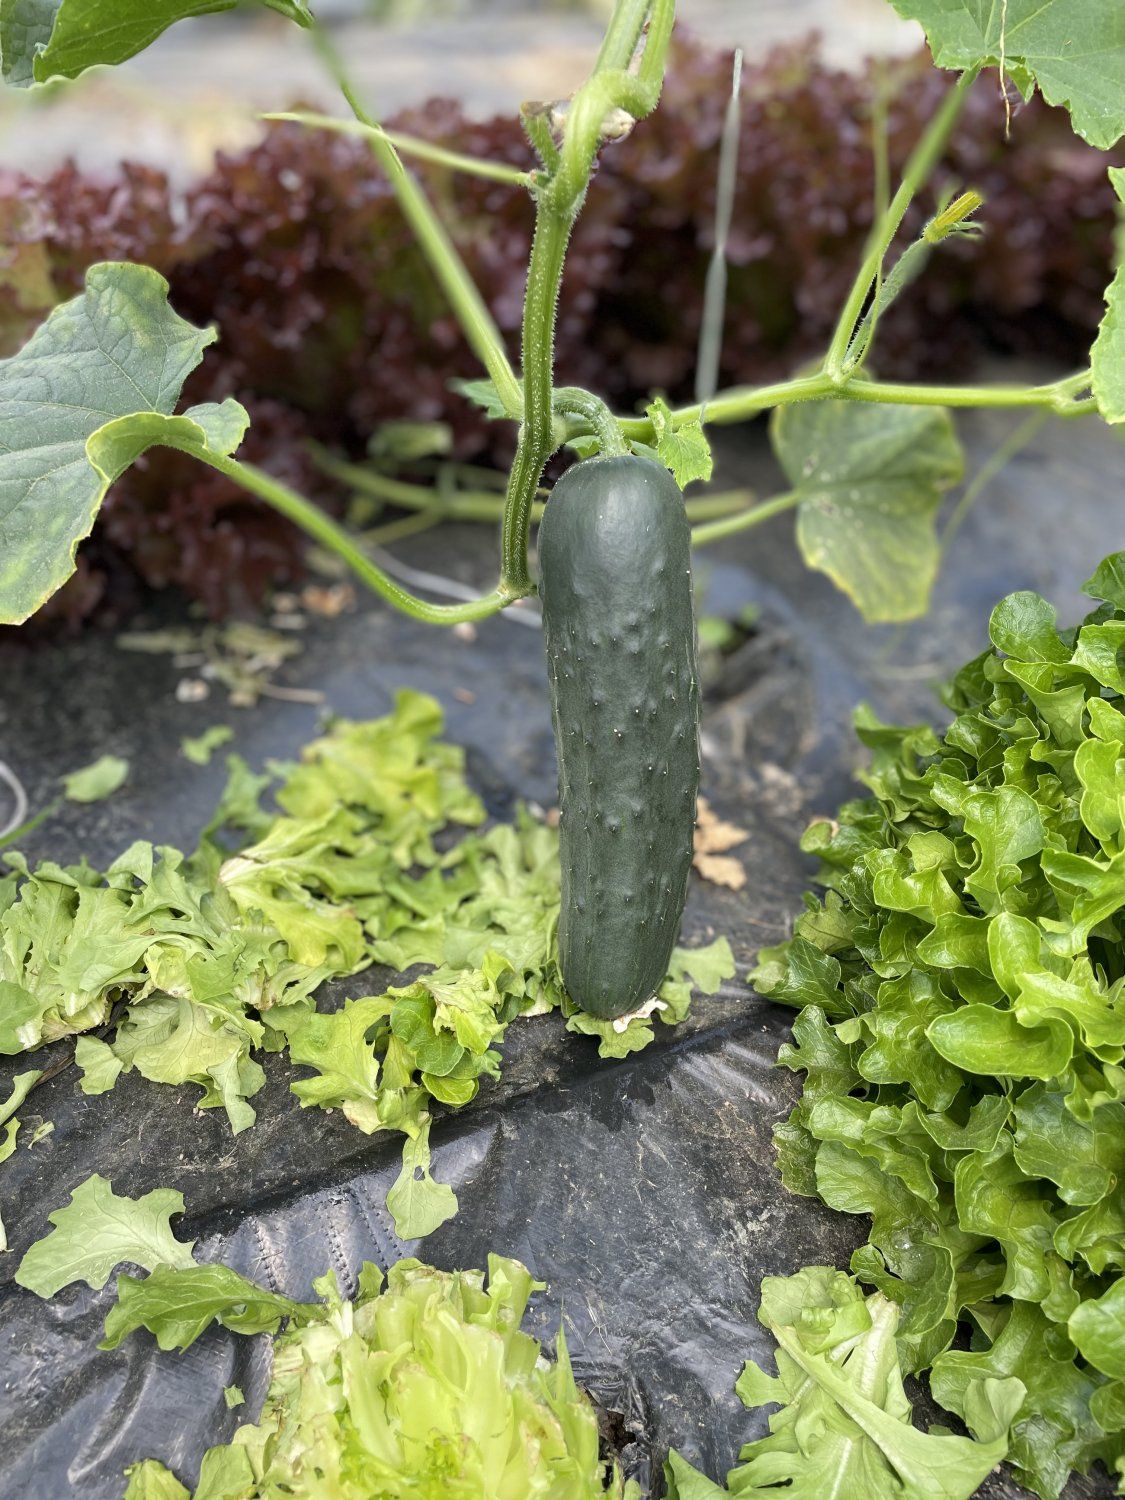 Next Happening: Heatwave and Cucumbers!